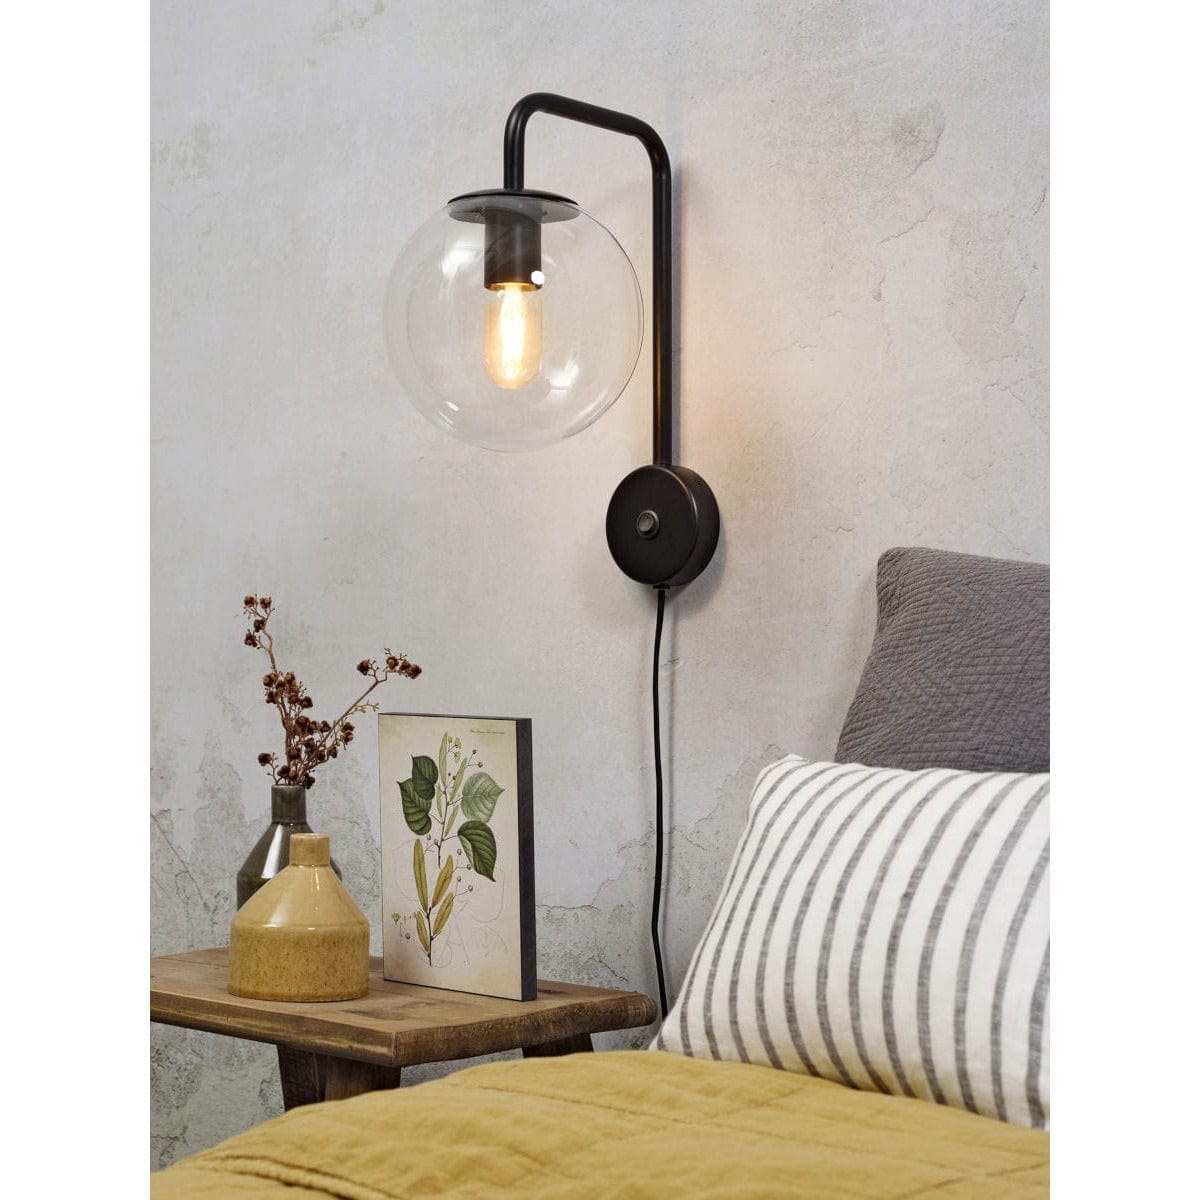 It's About RoMi Wall Lights Black Warsaw Wall Light Glass Black or Gold